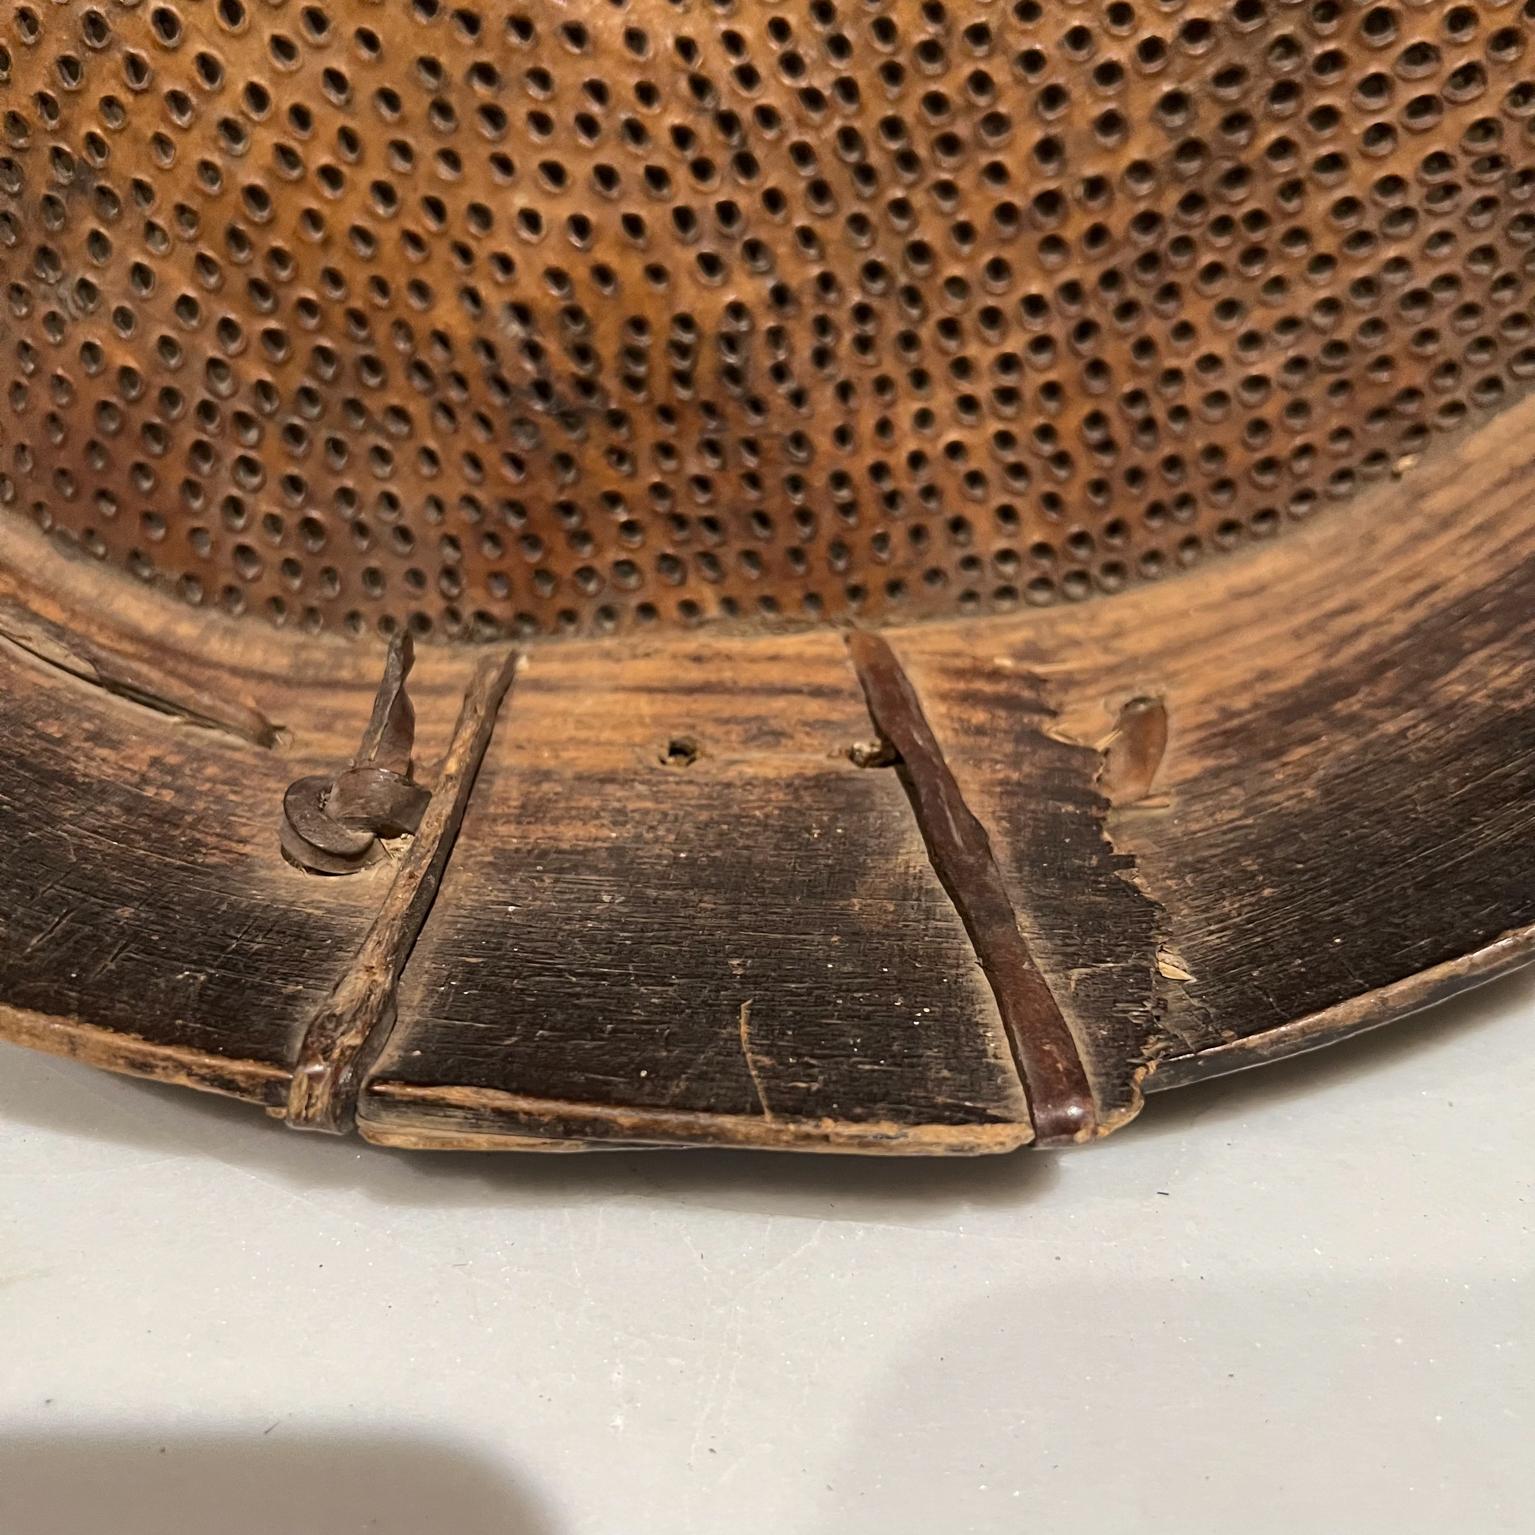 Farm tool
Antique Goatskin and Bentwood Flour Sieve Primitive Leather Strainer Sifter Kitchenware Farm Tool from Guatemala,1800s.
Decorative piece tons of charm.
15 in diameter x 4 h inches
Wear consistent with age and use. Minor structural